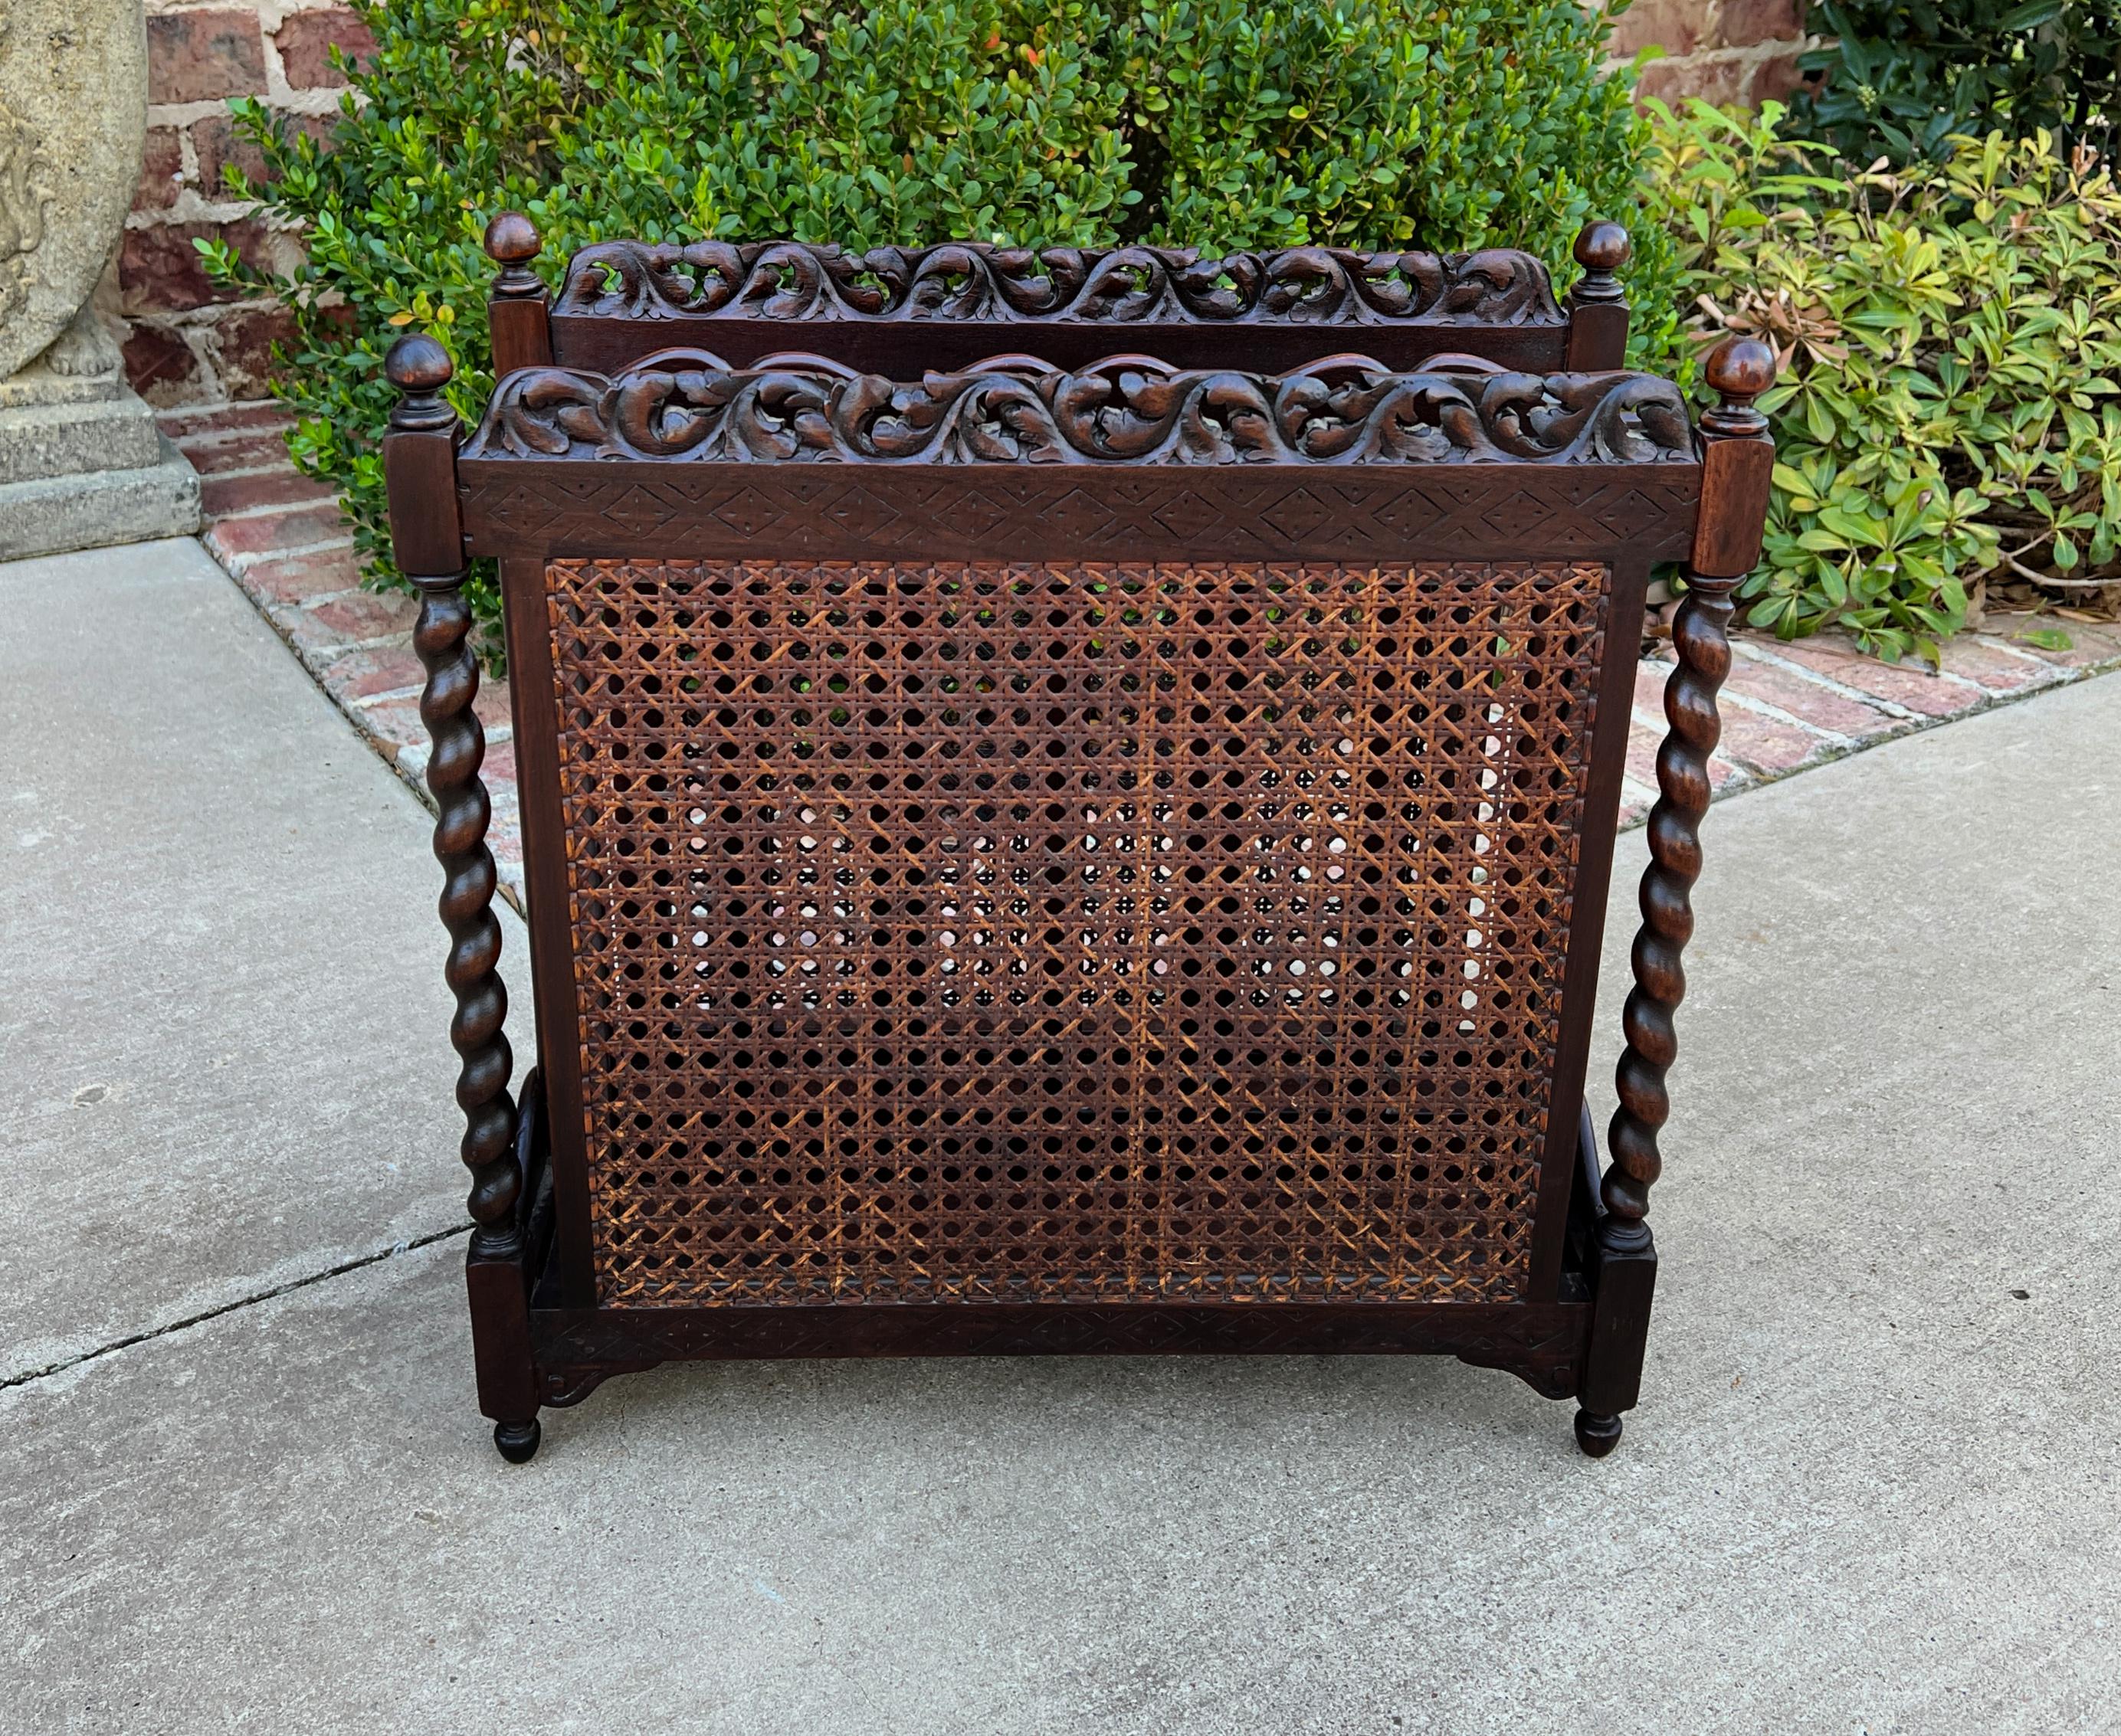 Antique French oak caned barley twist magazine rack or book stand~~circa 1920s
Charming decorative accent piece for today's home~~perfect for a reading nook, living area, bedroom, or study/office
Caned sides with Classic barley twist posts
Versatile